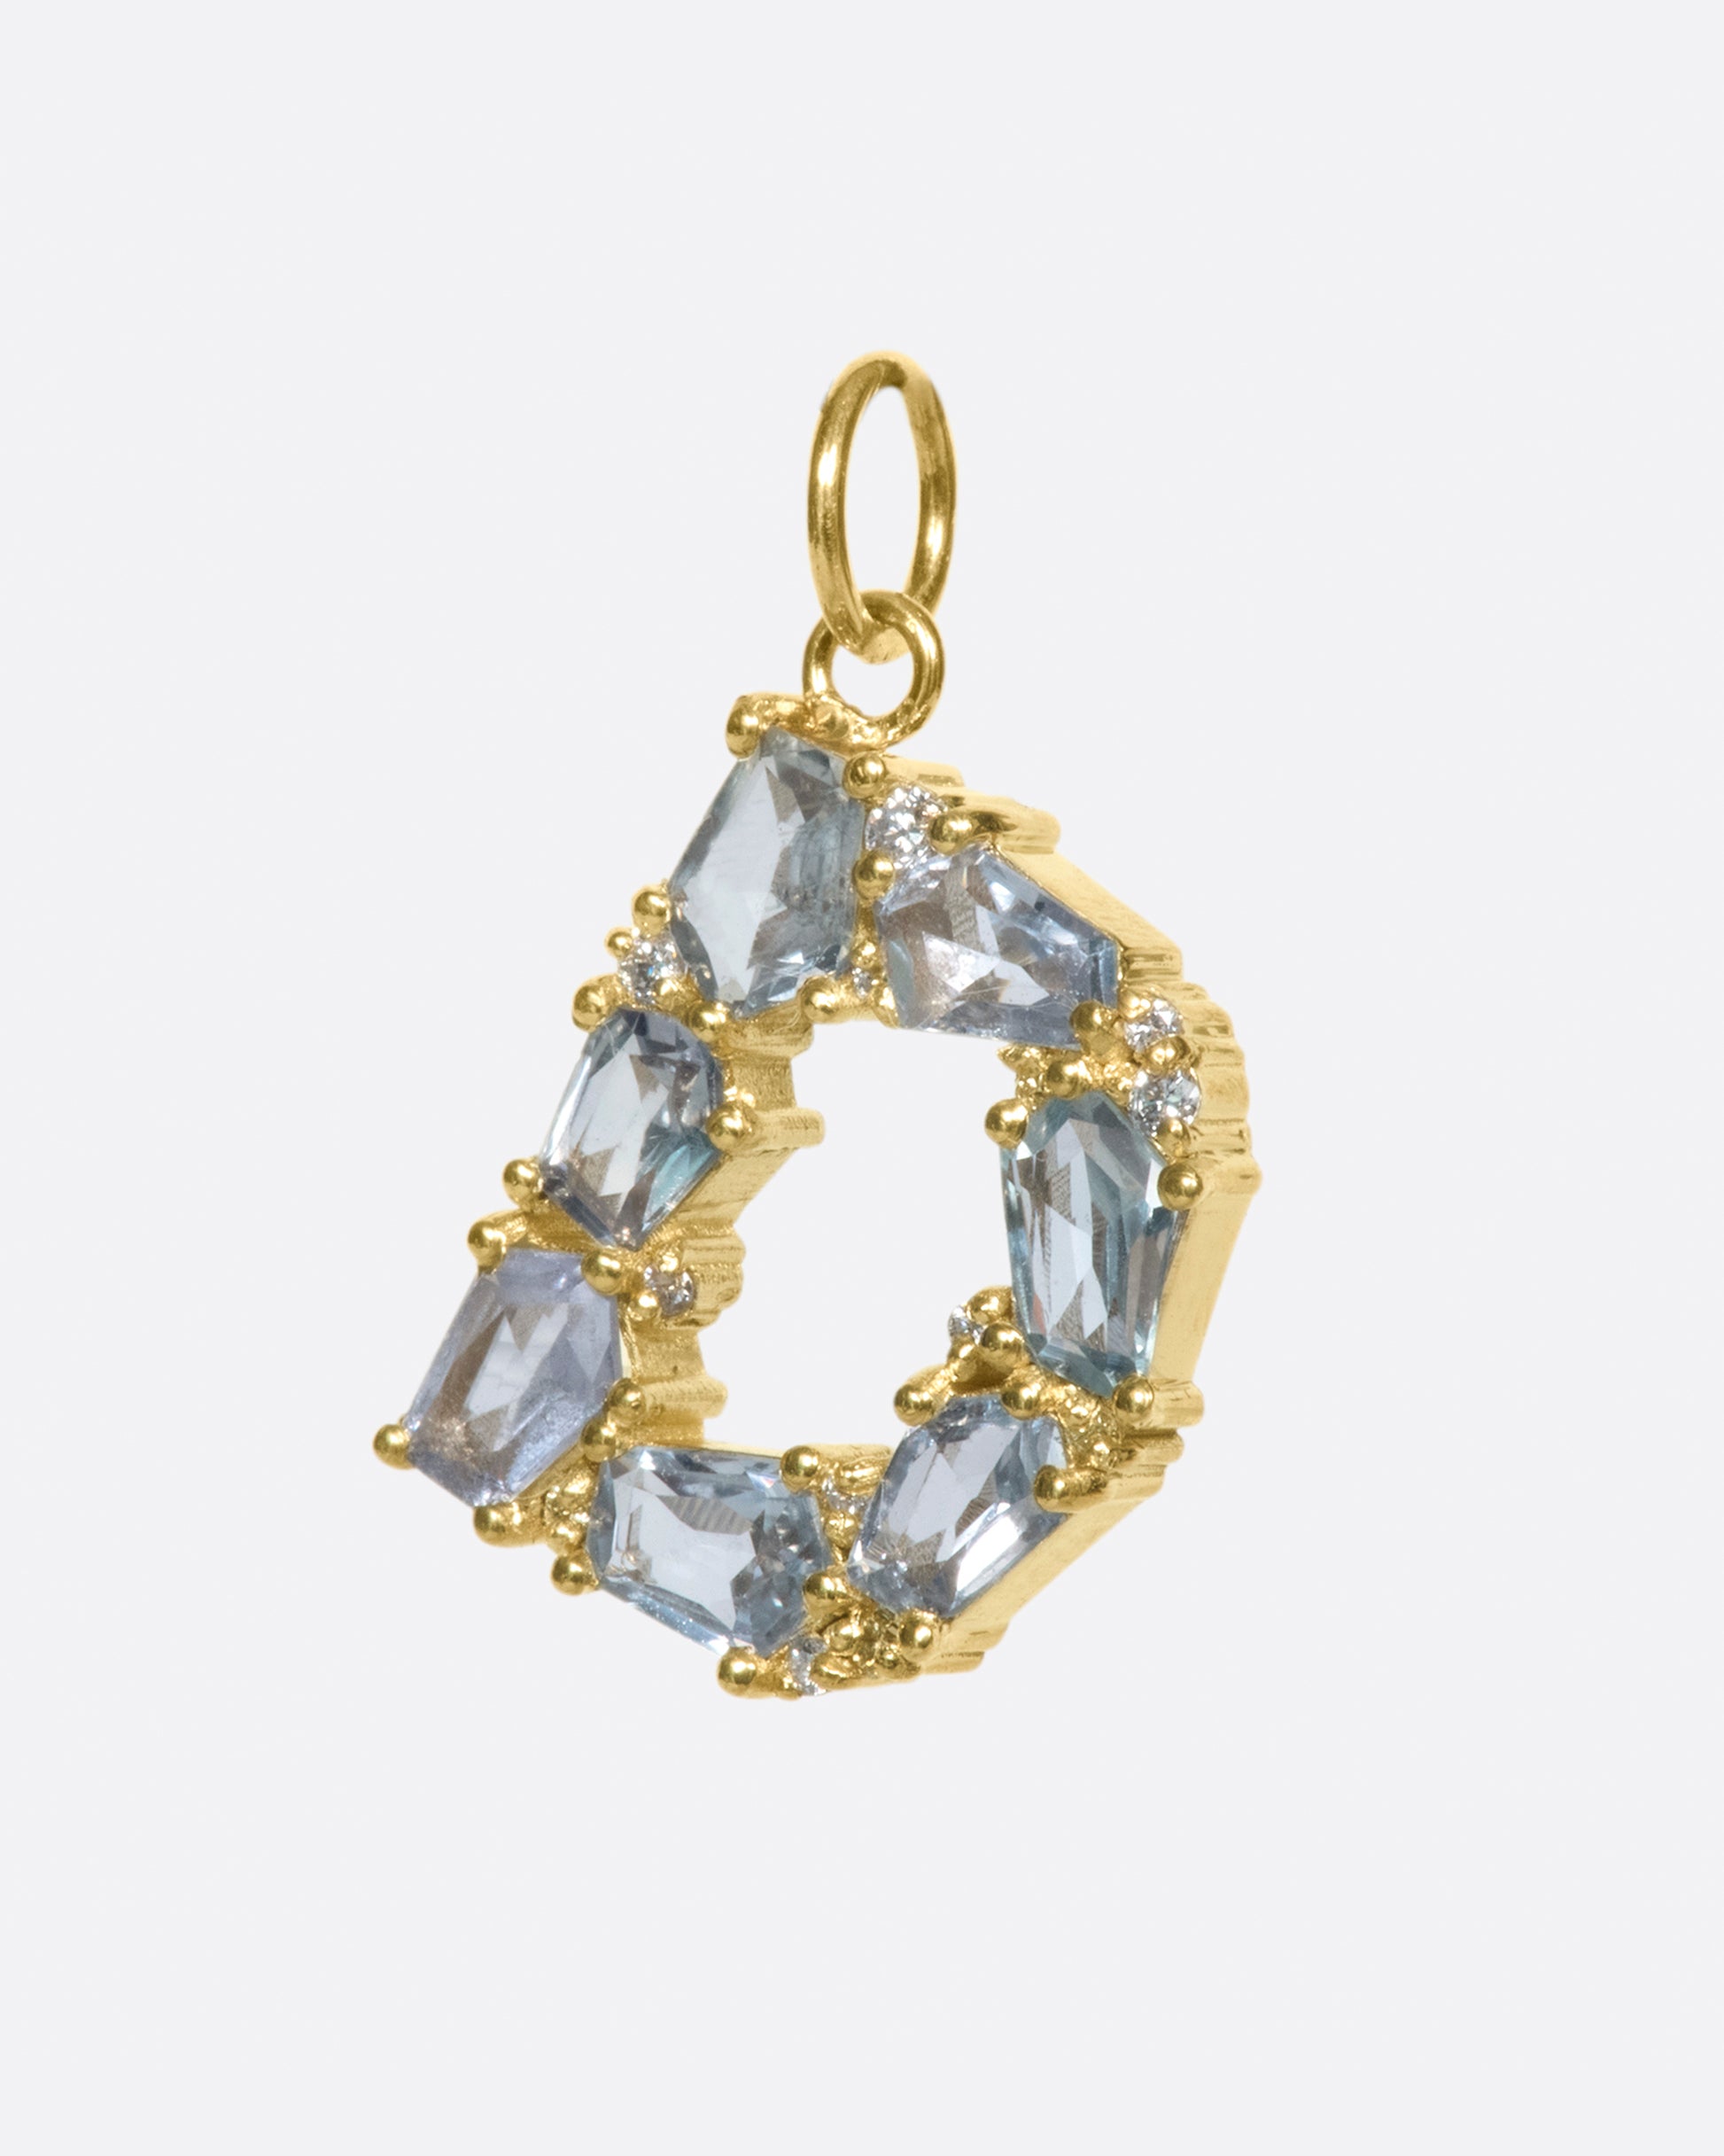 One of ERA's signature mosaic letter pendants, this time with light blue sapphires and diamonds.